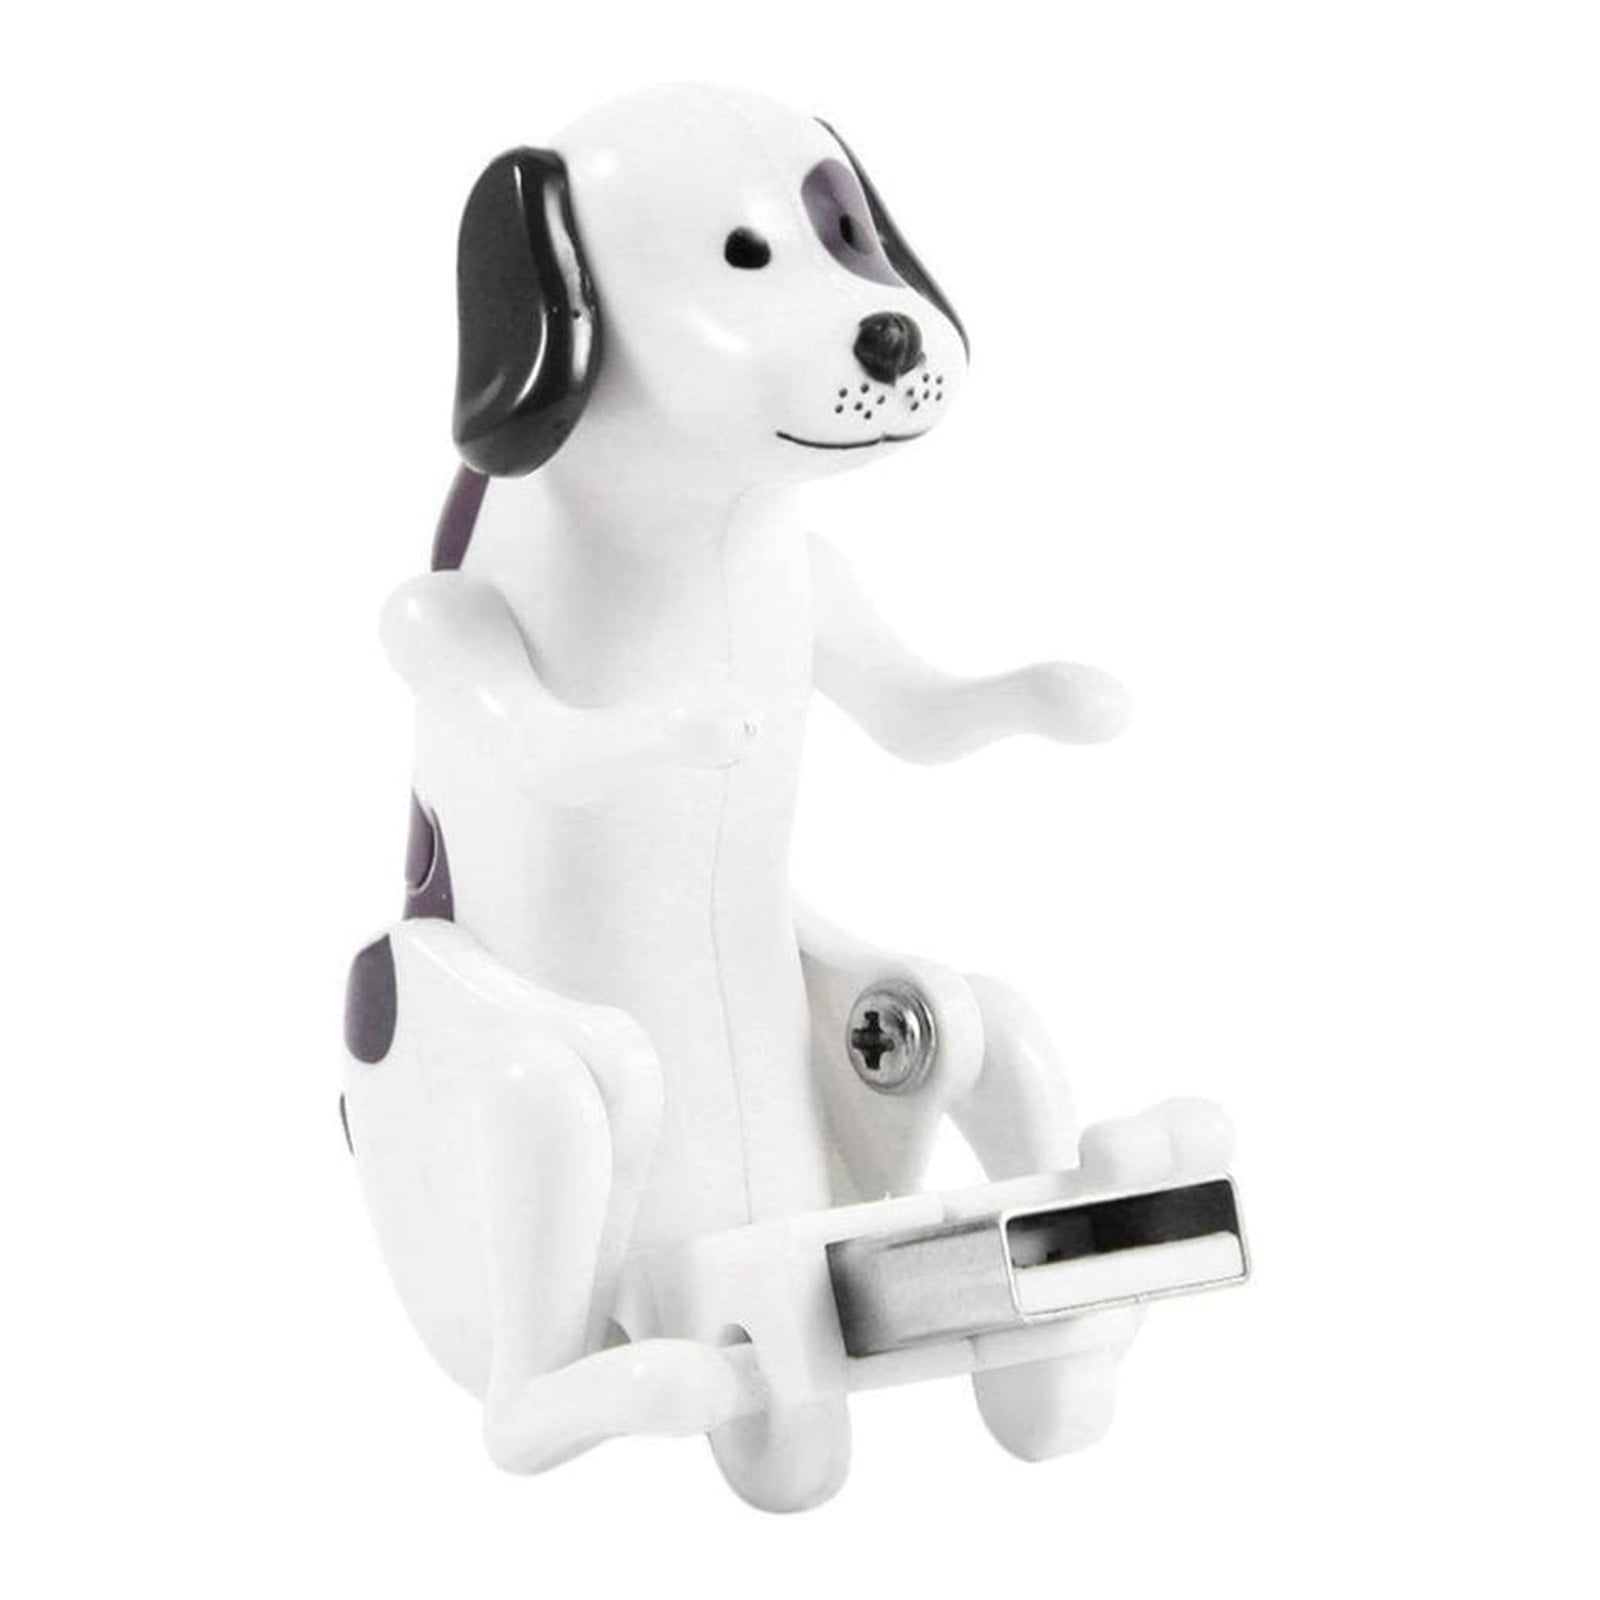 iMESTOU Deals Clearance Cable&Charger Funny Humping Dog USB Flash Drive Dog Swing When Novelty USB2.0 - Walmart.com